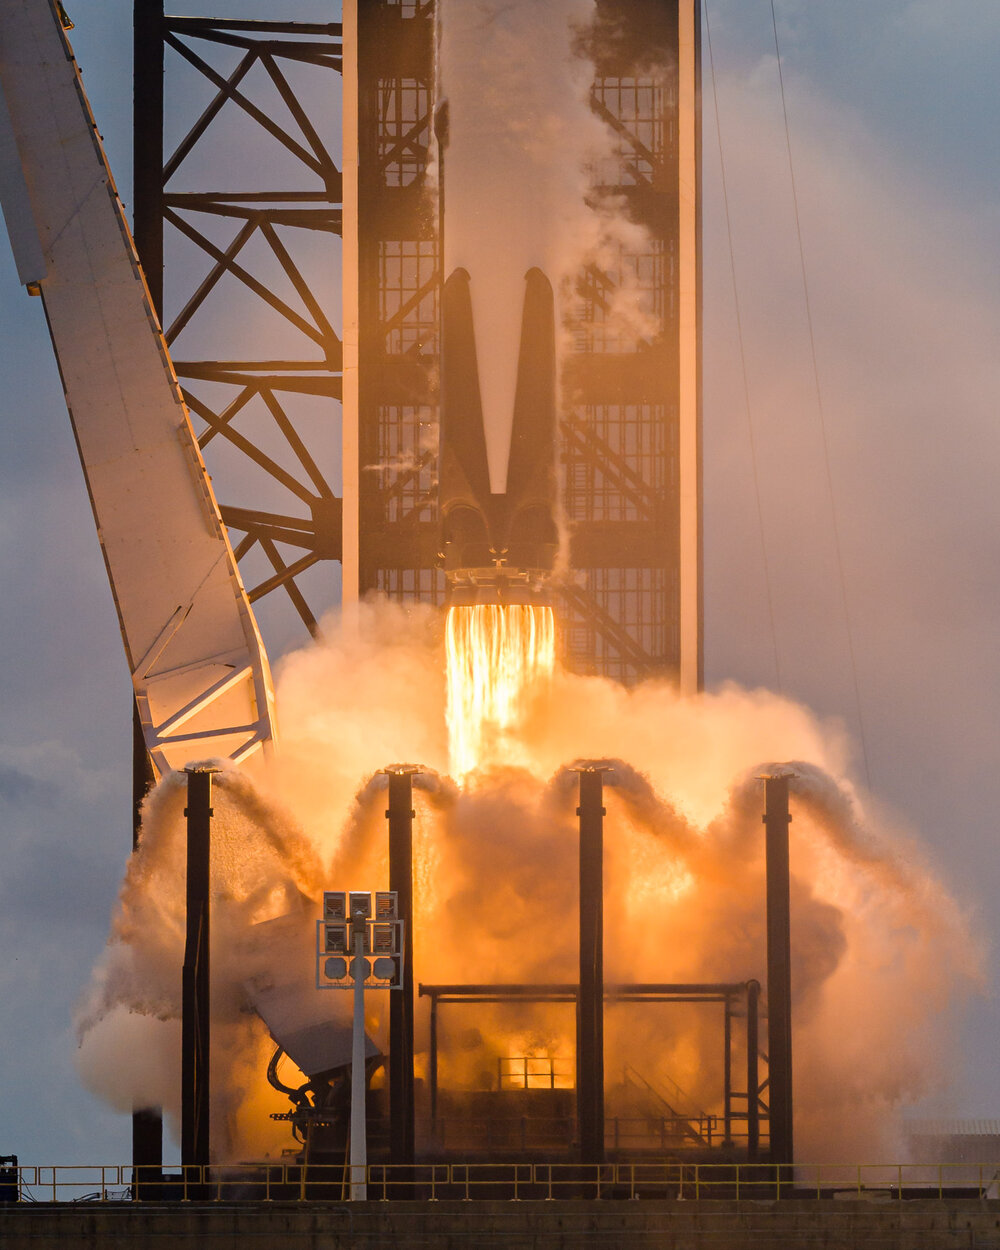 Flame details from the Falcon 9 Merlin engines – Nikon D5, 150mm, 1/4000 sec, f/9, ISO 100 – 1300 ft (395 m) from launch pad.